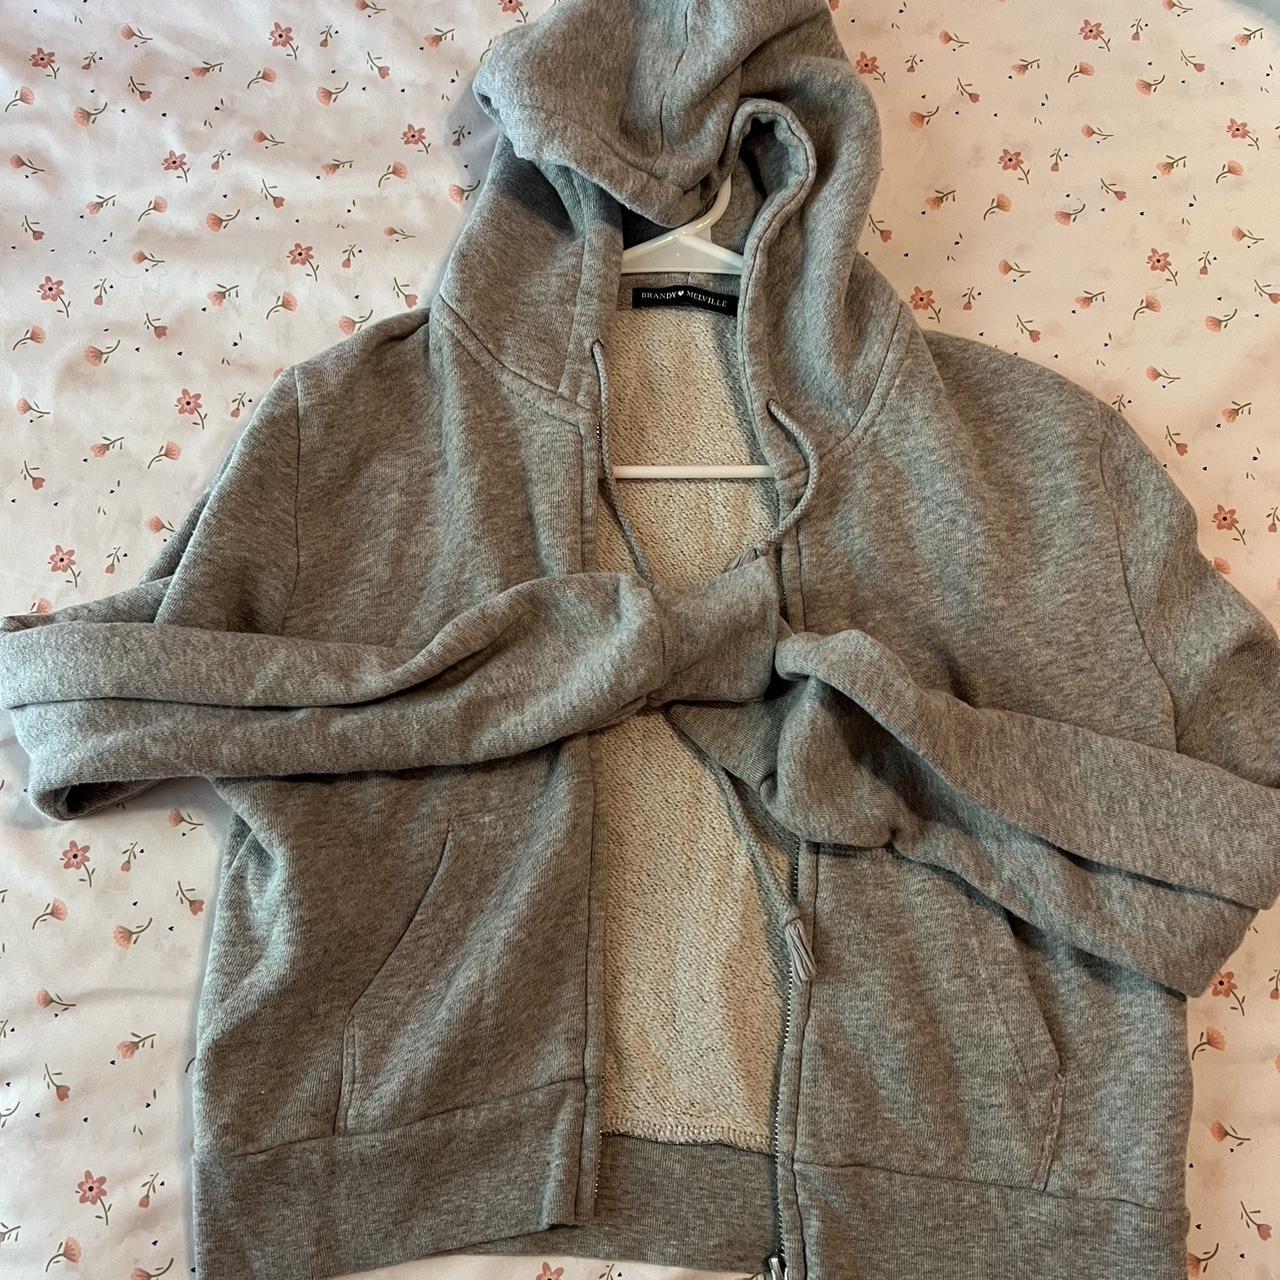 Brandy Melville cropped zip up Really comfy and - Depop